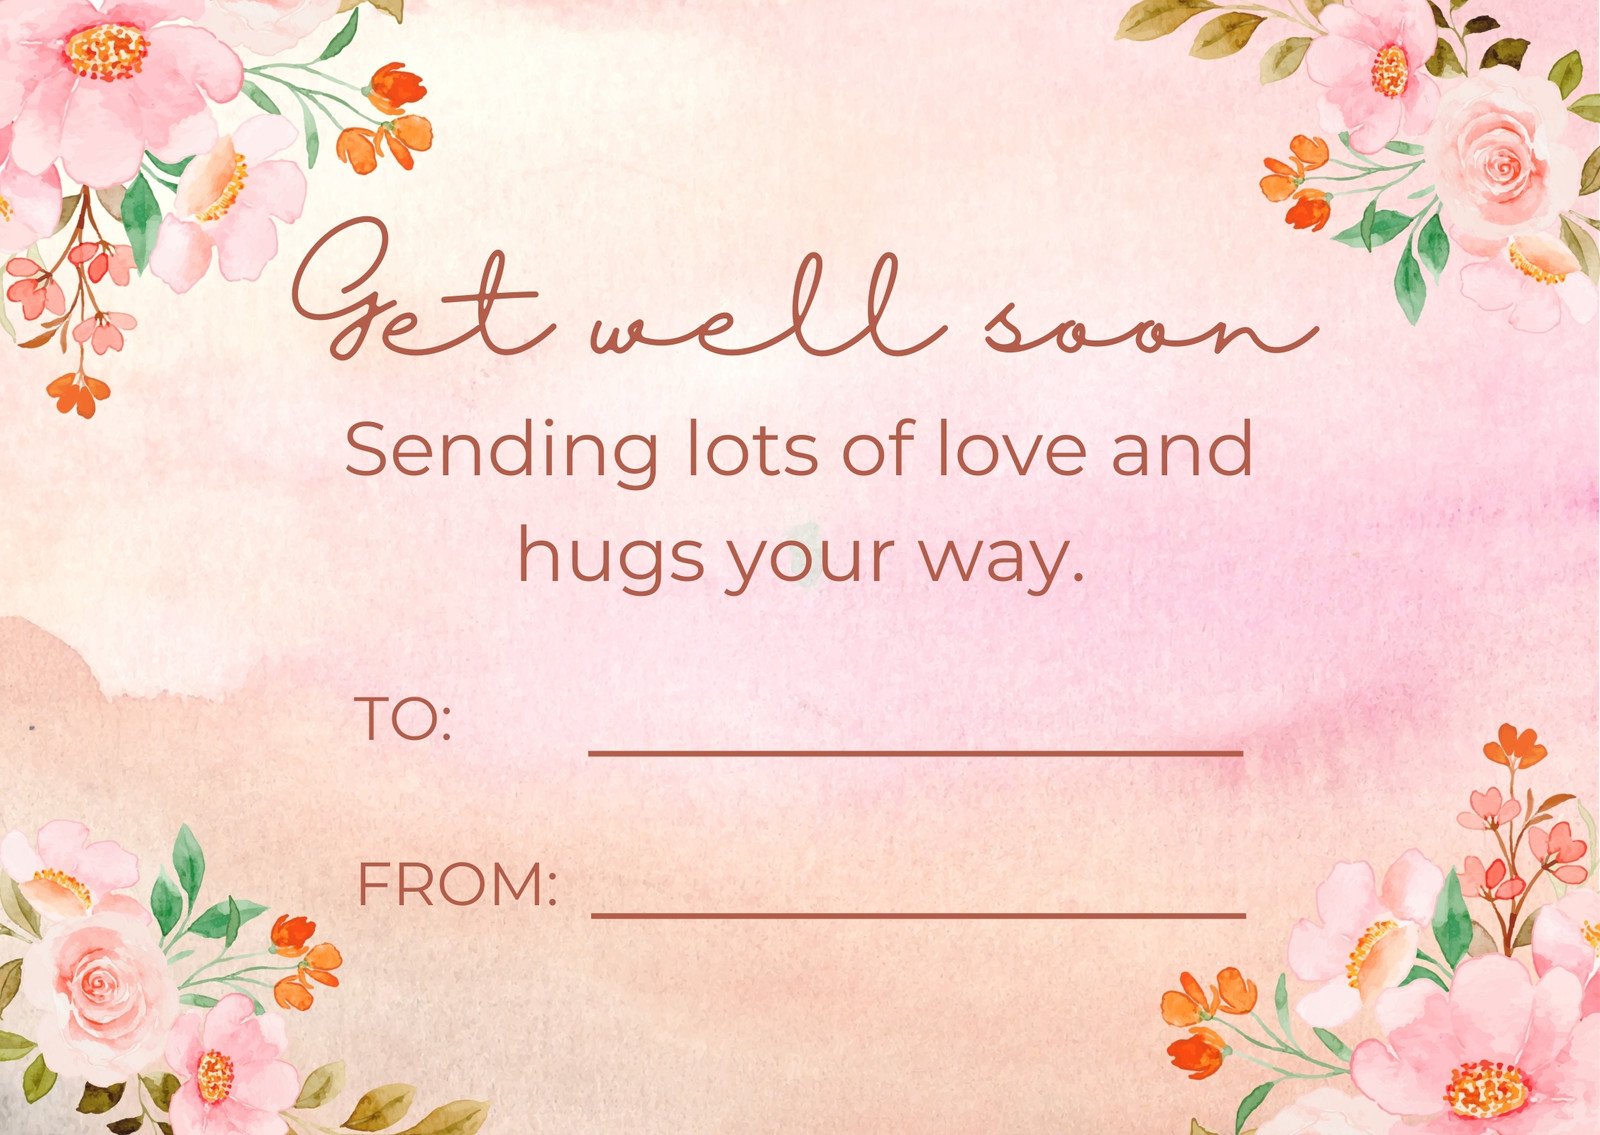 our-featured-products-get-well-soon-greeting-card-online-fashion-store